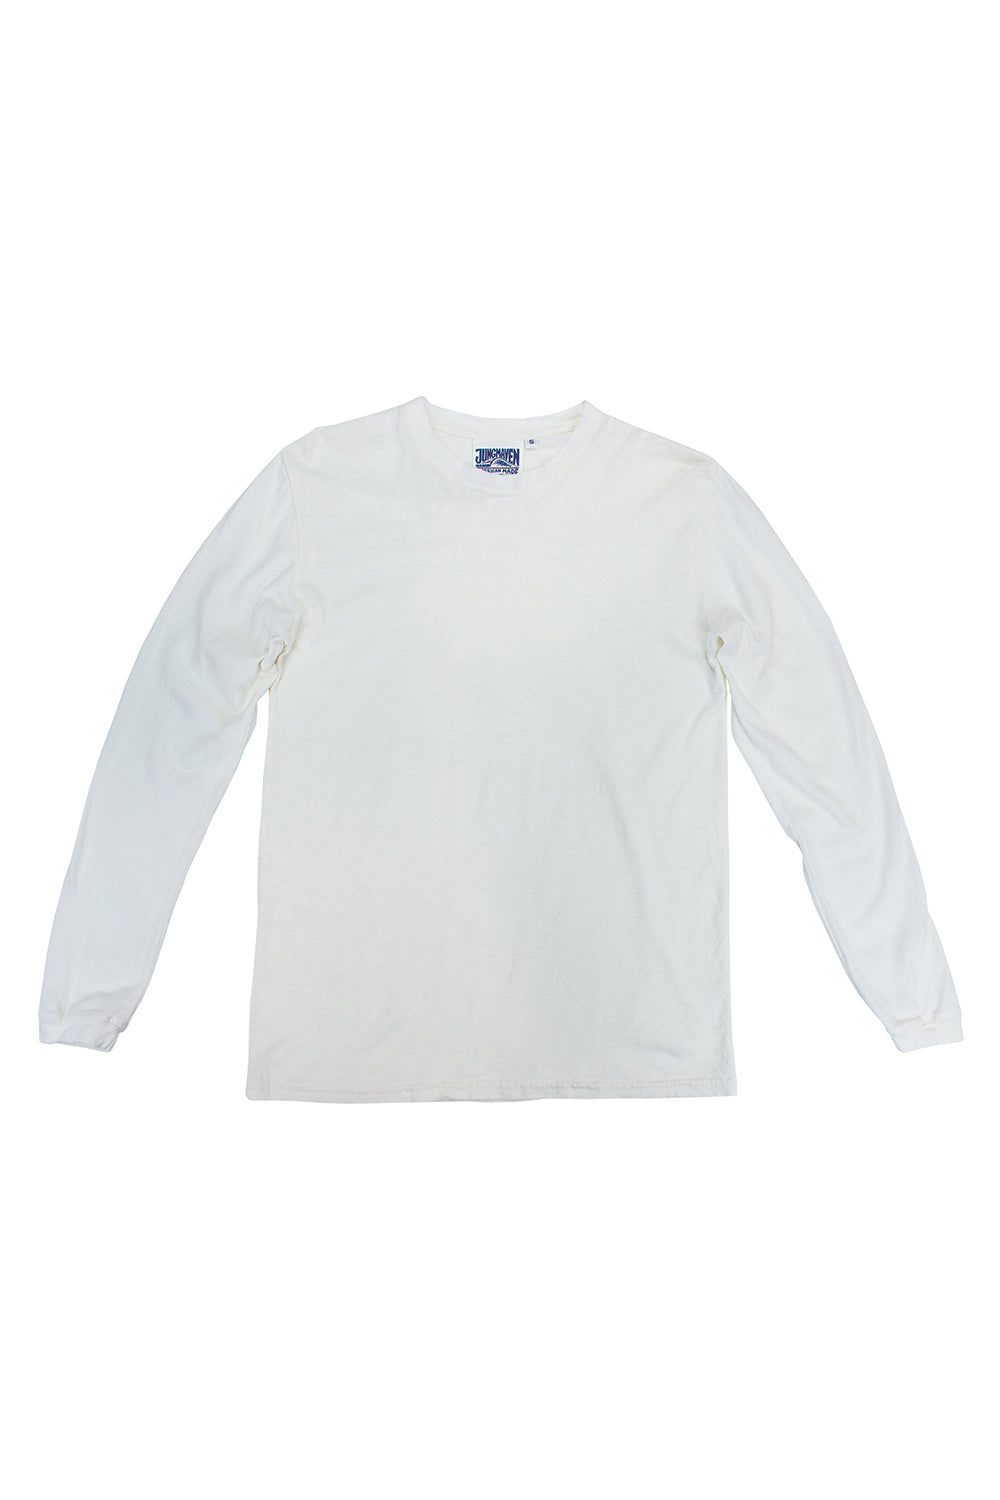 Jung Long Sleeve Tee | Jungmaven Hemp Clothing & Accessories / Color: Washed White